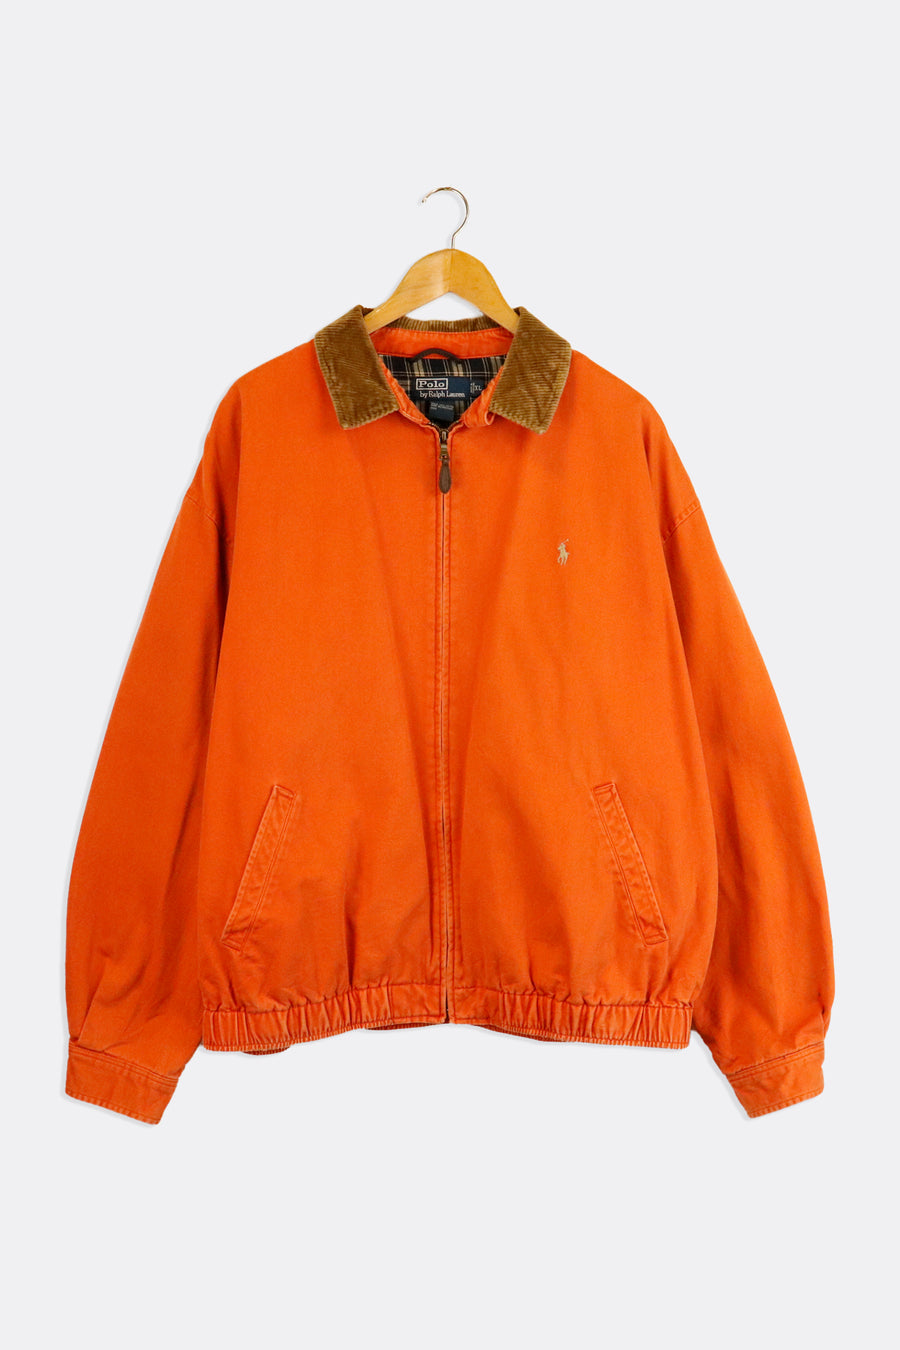 Vintage Polo Ralph Lauren Soft Full Zip Jacket Cord Collar Outerwear S – F  As In Frank Vintage